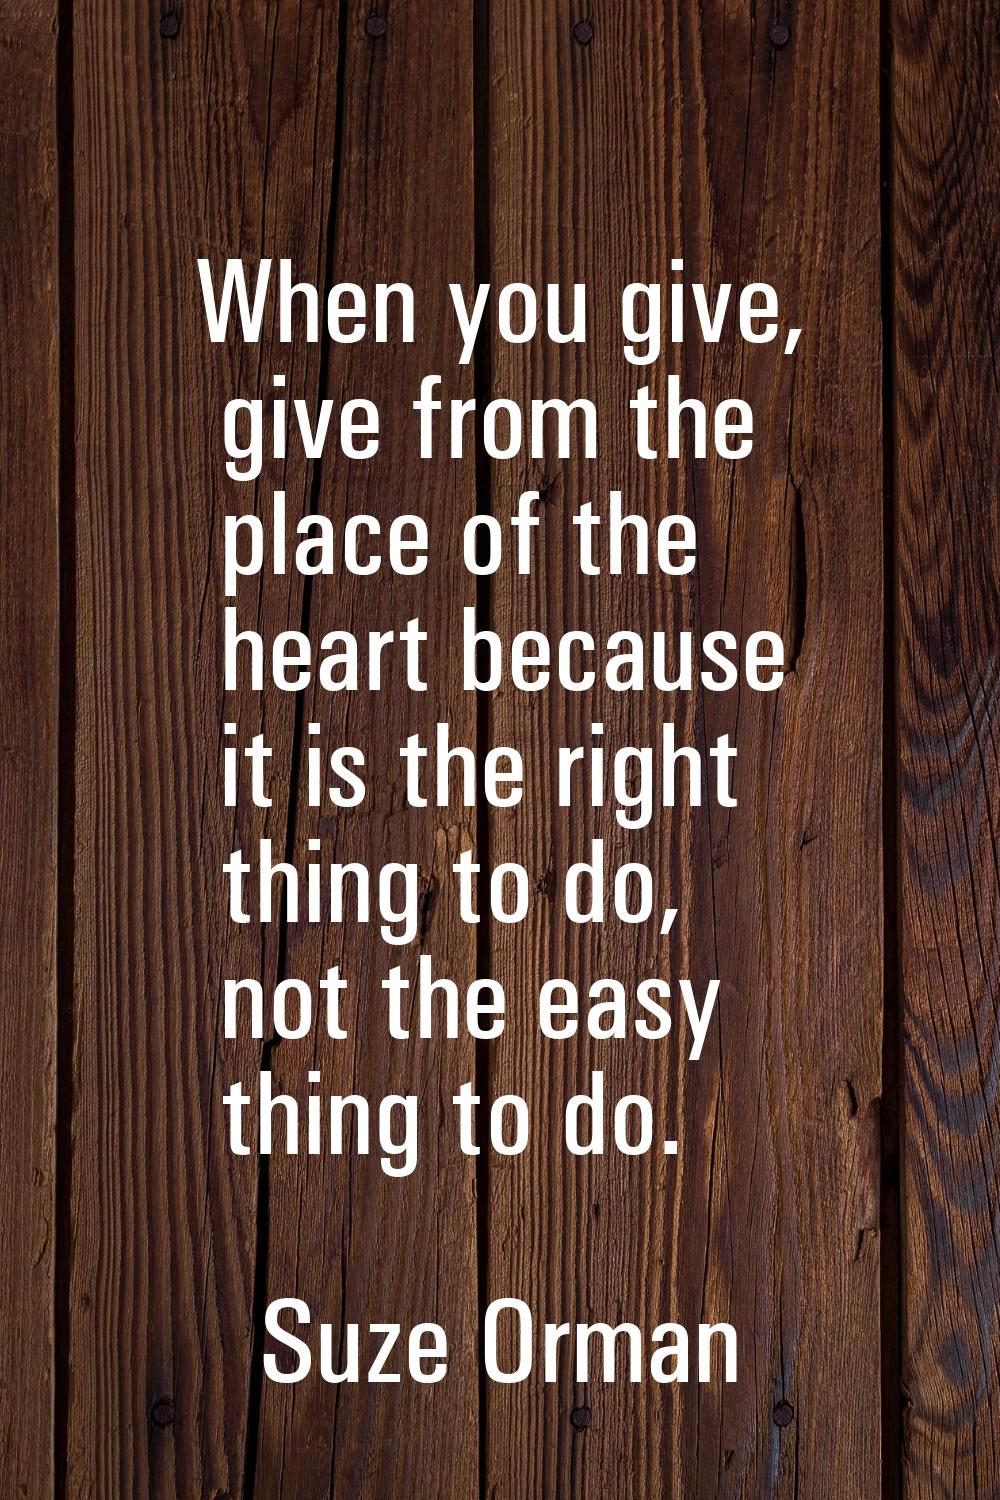 When you give, give from the place of the heart because it is the right thing to do, not the easy t